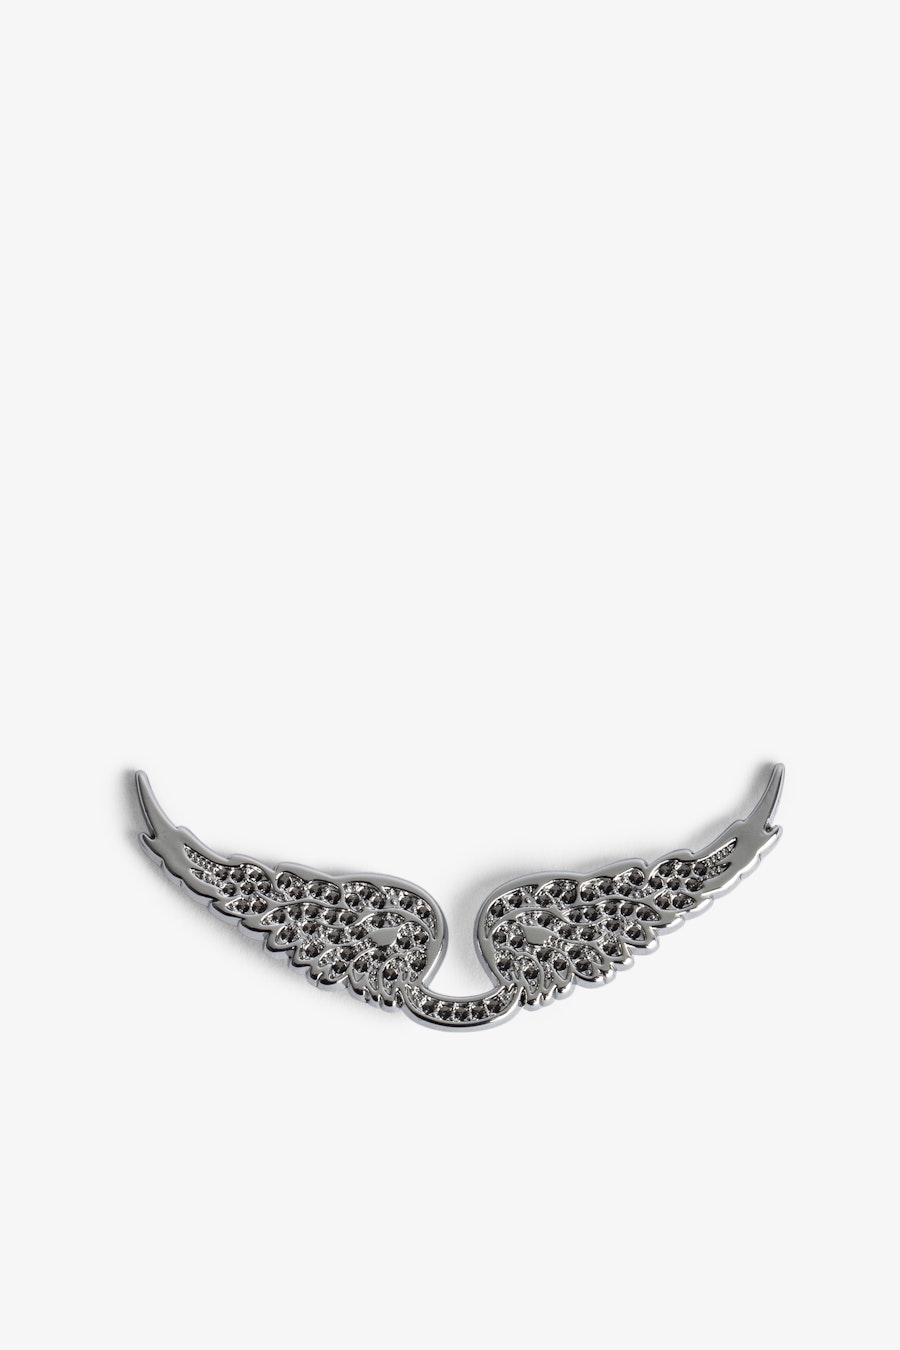 ZADIG&VOLTAIRE Swings Your Wings Diamante Charm